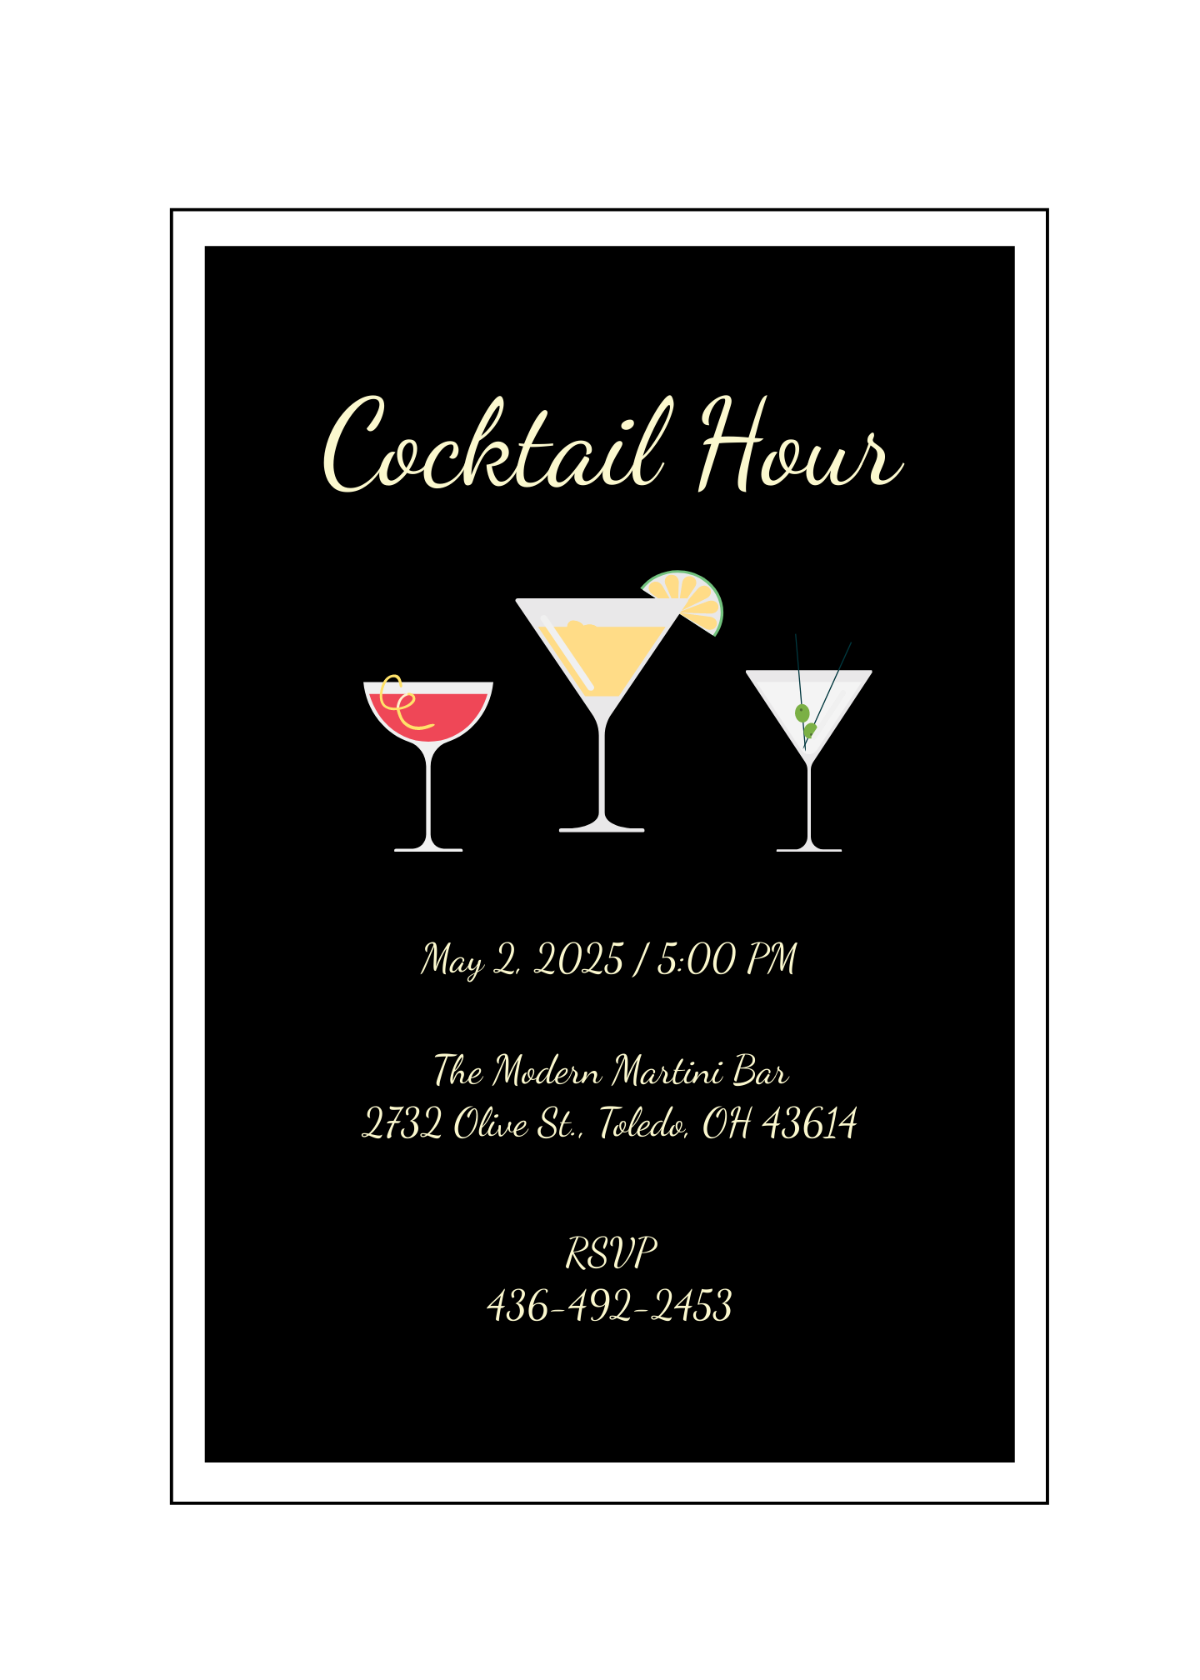 Cocktail Hour Invitation Template